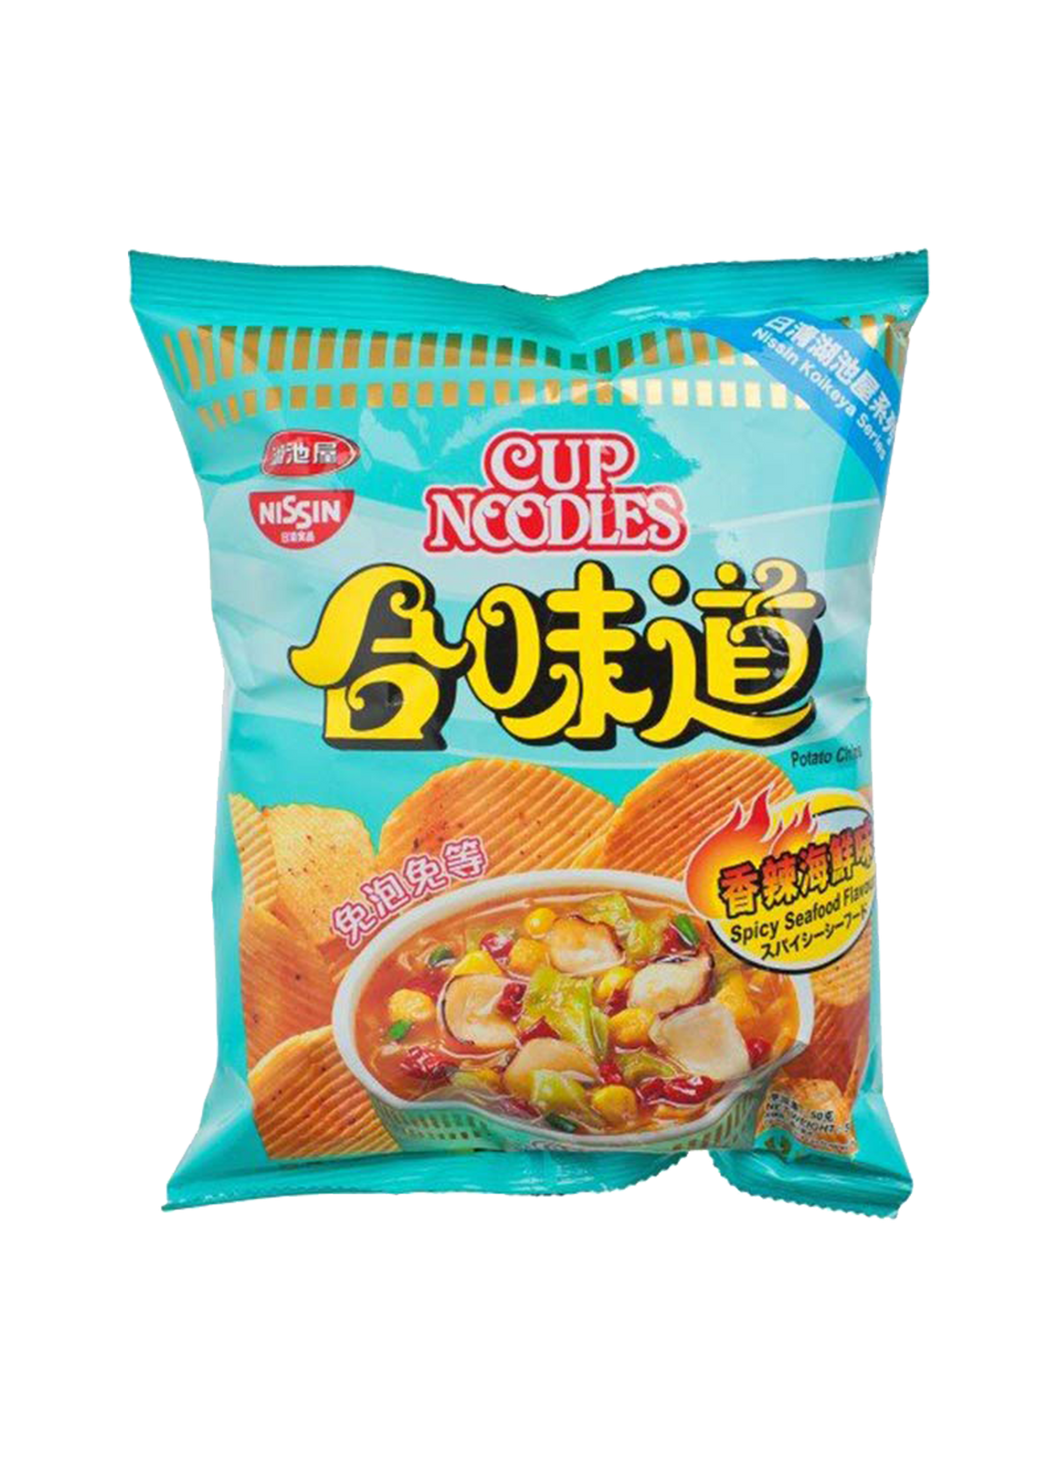 Cup Noodles Spicy Seafood Flavor Potato Chips 50g